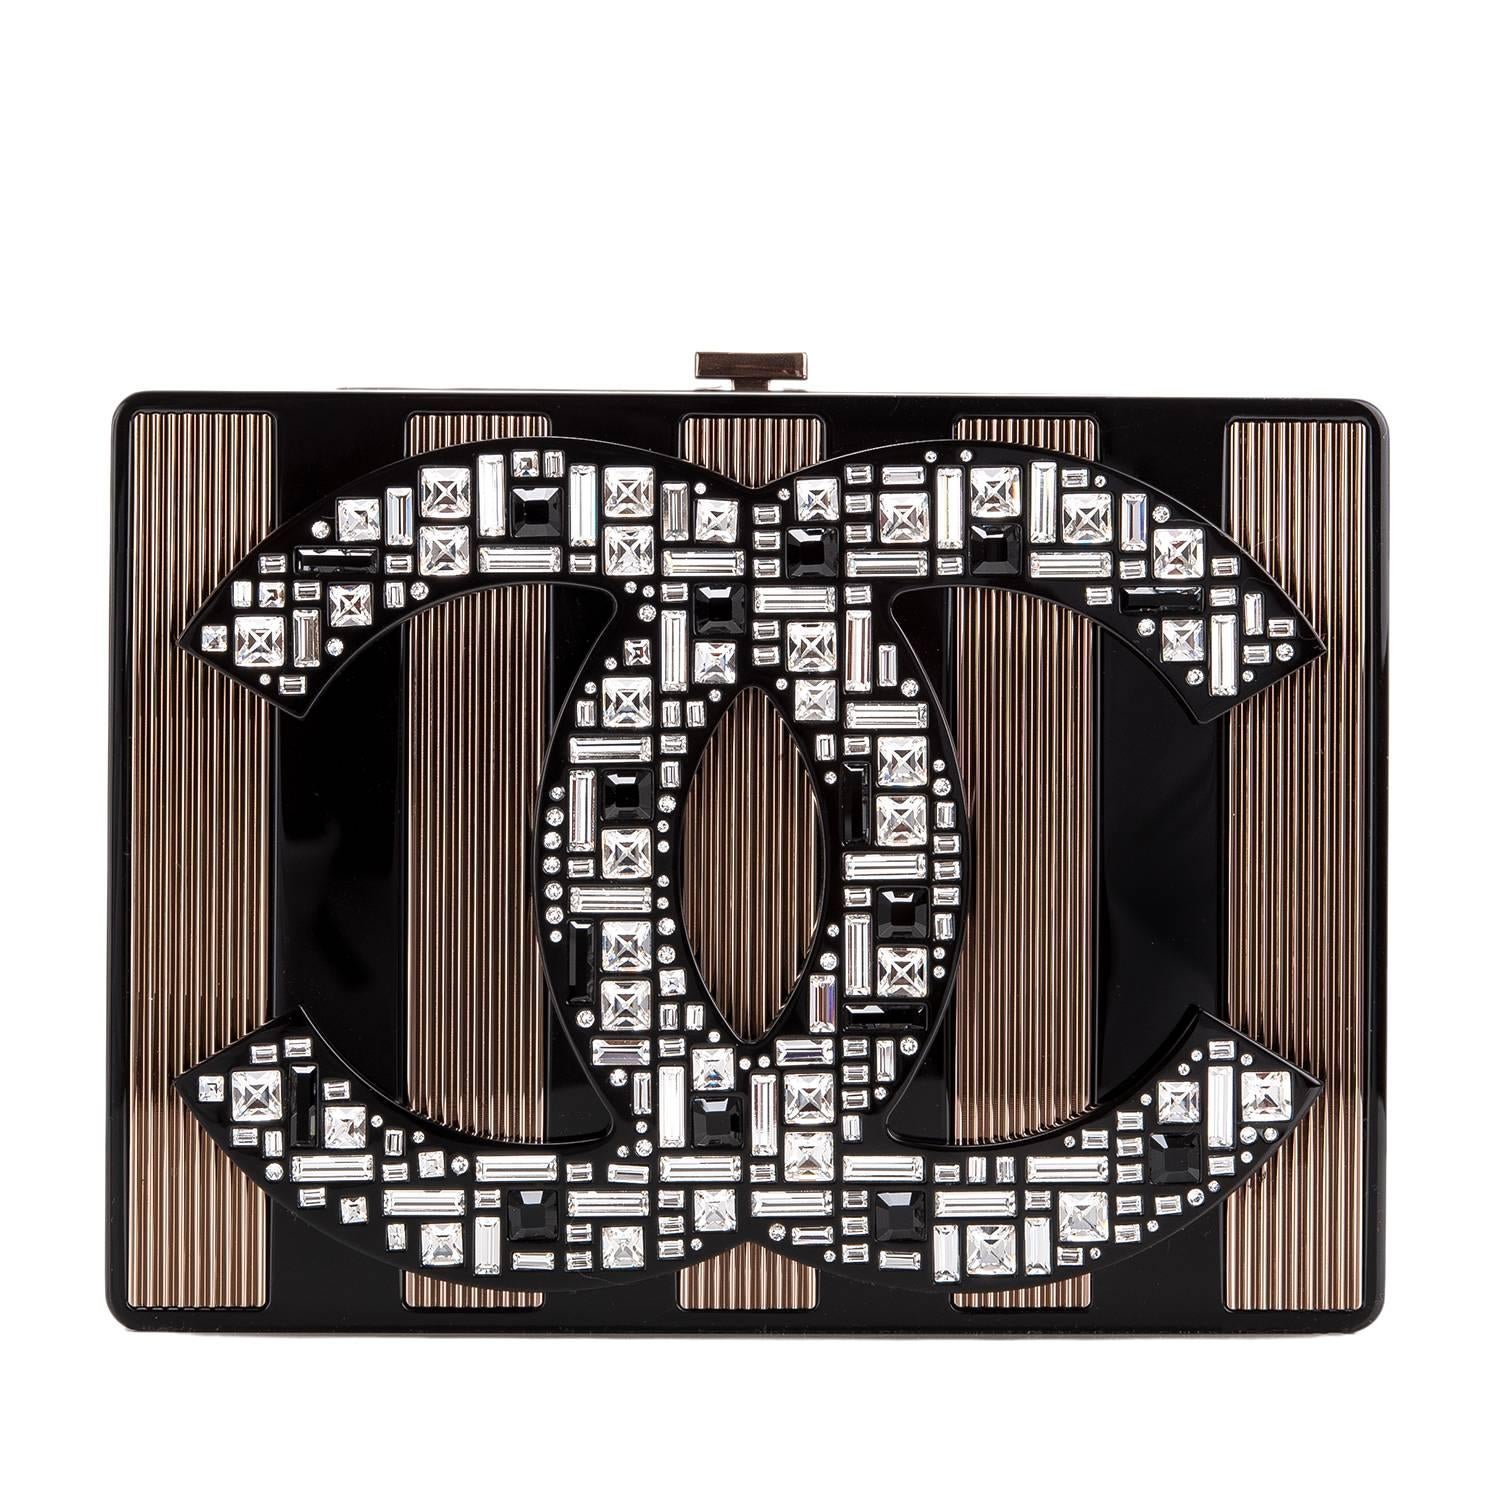 Chanel limited edition, runway "CC" logo minaudiere of black plexiglass with black plexiglass and copper tone hardware.

This rare, collectible bag features front black plexiglass and copper tone metal alternating stripes with the